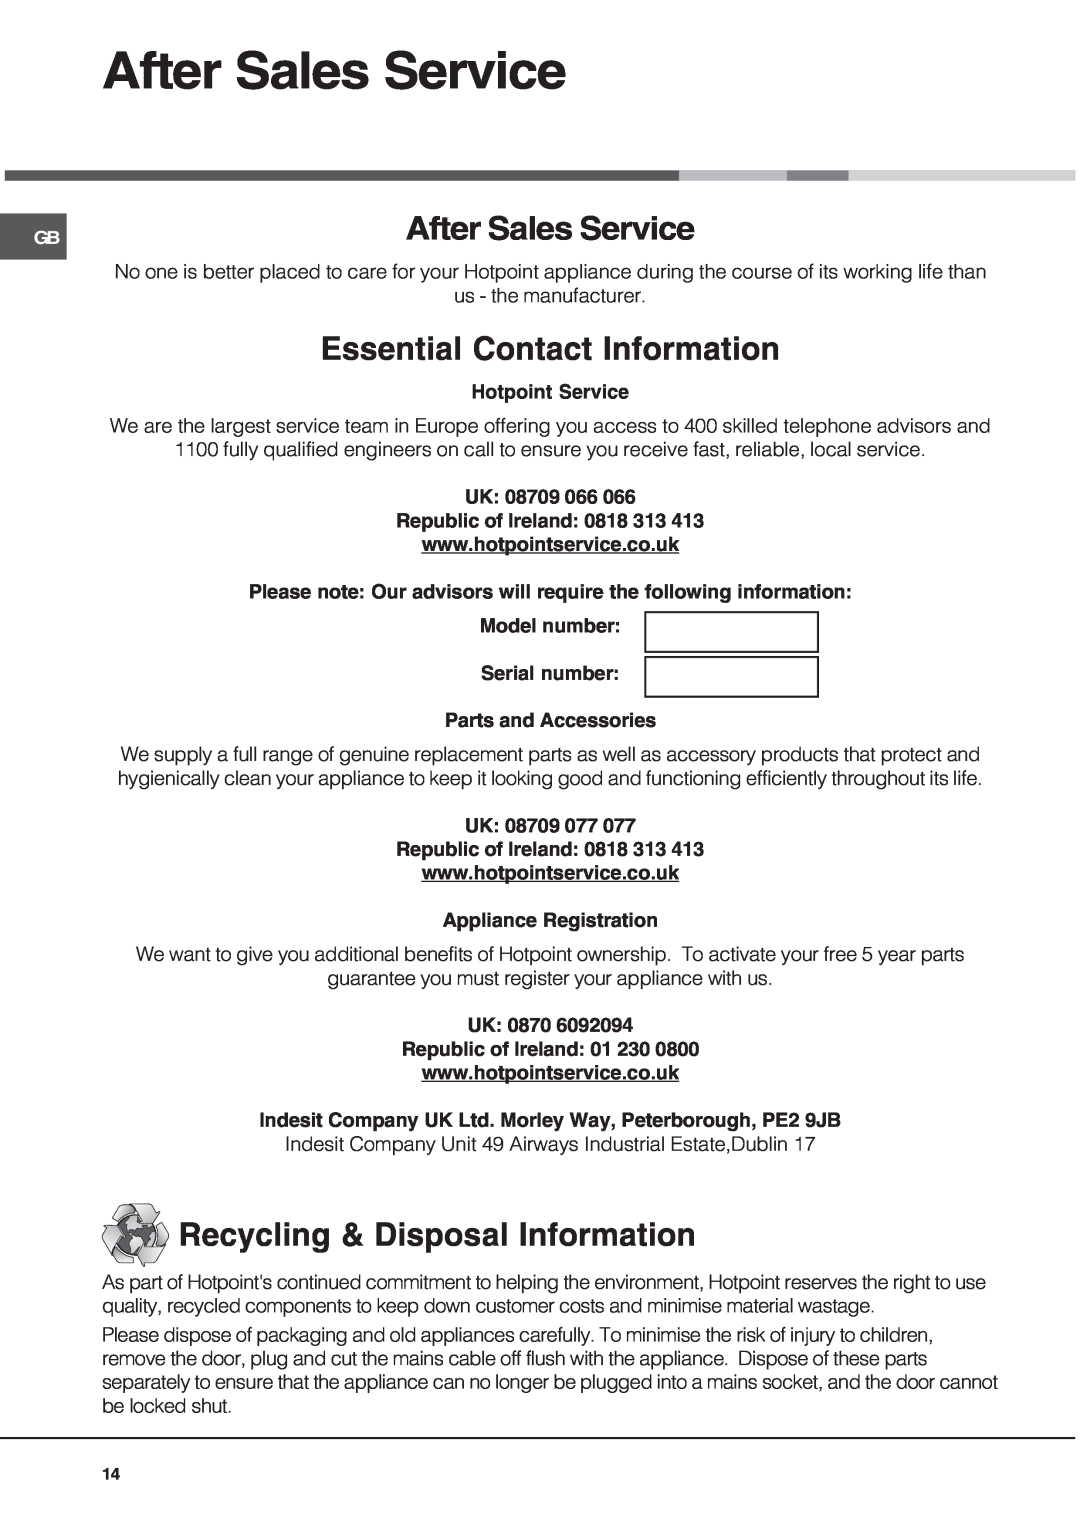 Hotpoint SE101PX manual After Sales Service, Essential Contact Information, Recycling & Disposal Information 